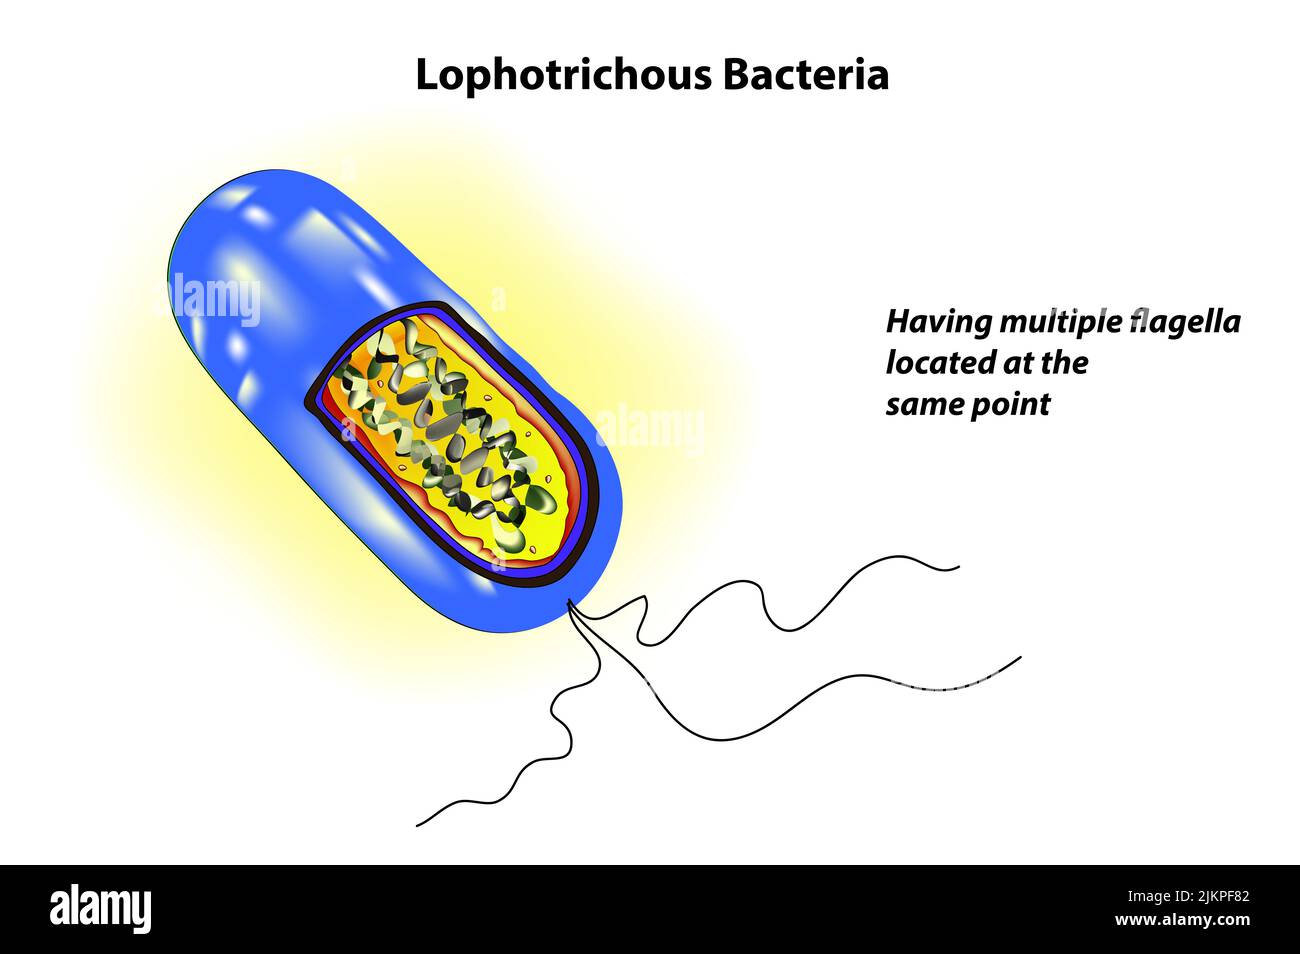 Lophotrichous Bacteria (multiple flagella located at the same spot on the bacteria's surfaces) Stock Photo